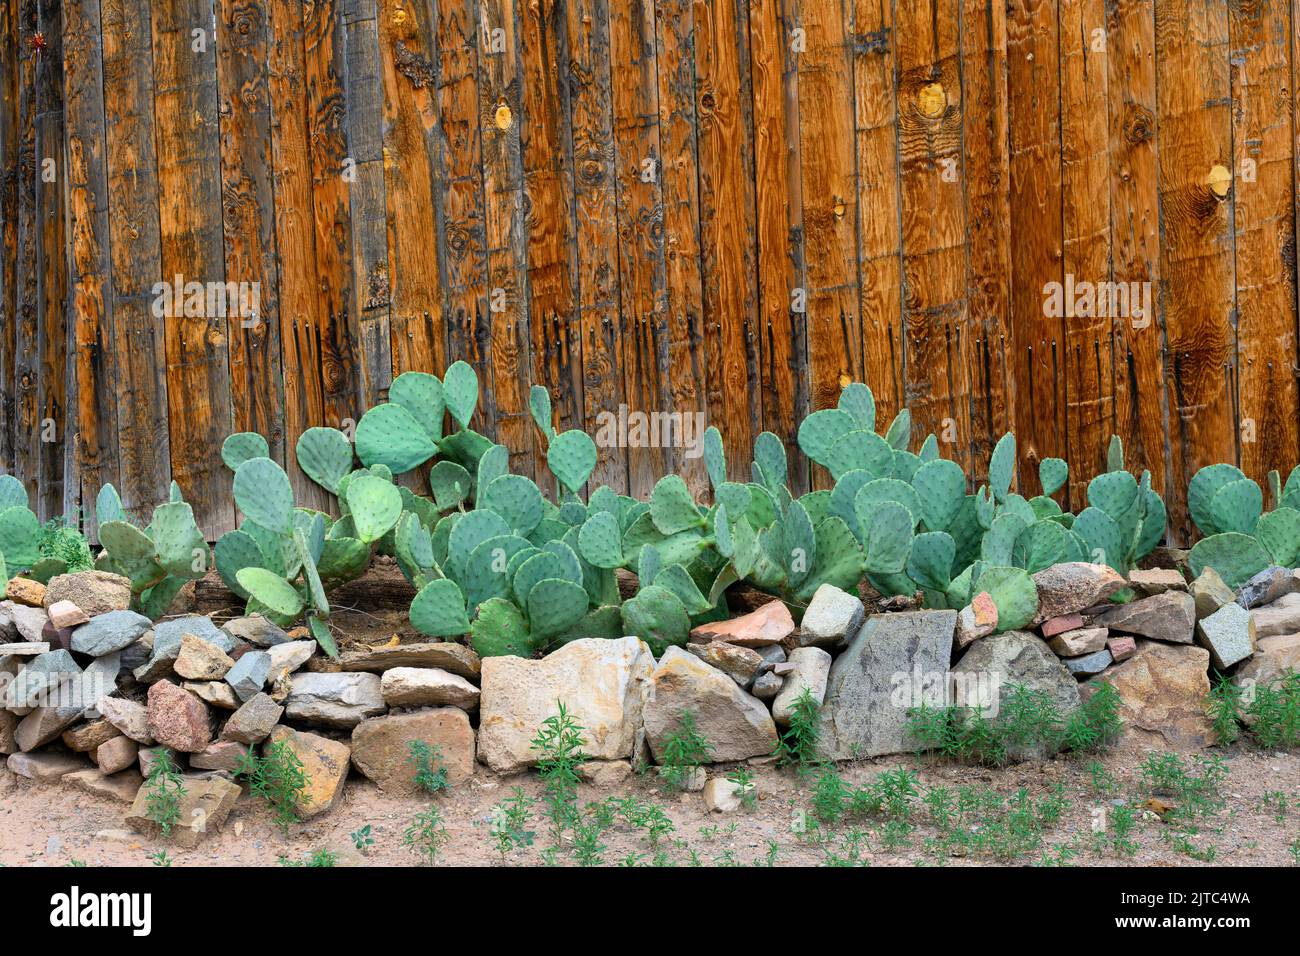 Cactuses (Cacti) in front of wooden fence at home in Los Cerrollos, New Mexico Stock Photo